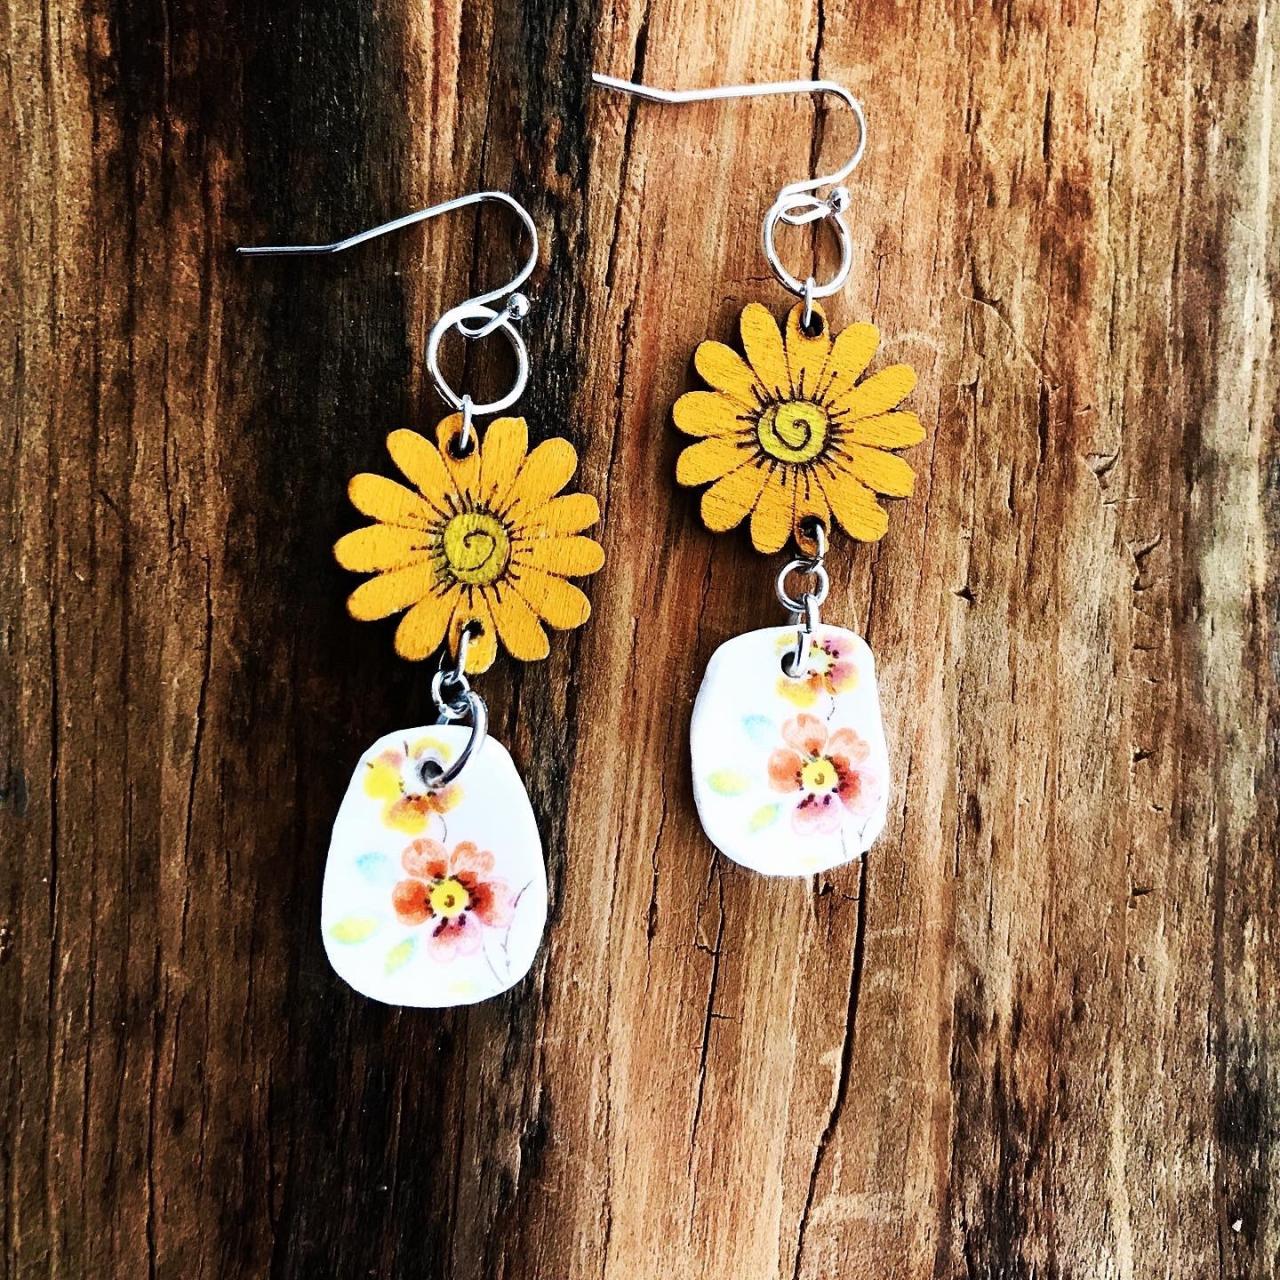 Pretty Golden Flower And China Flower Earrings With Sterling Silver Wires